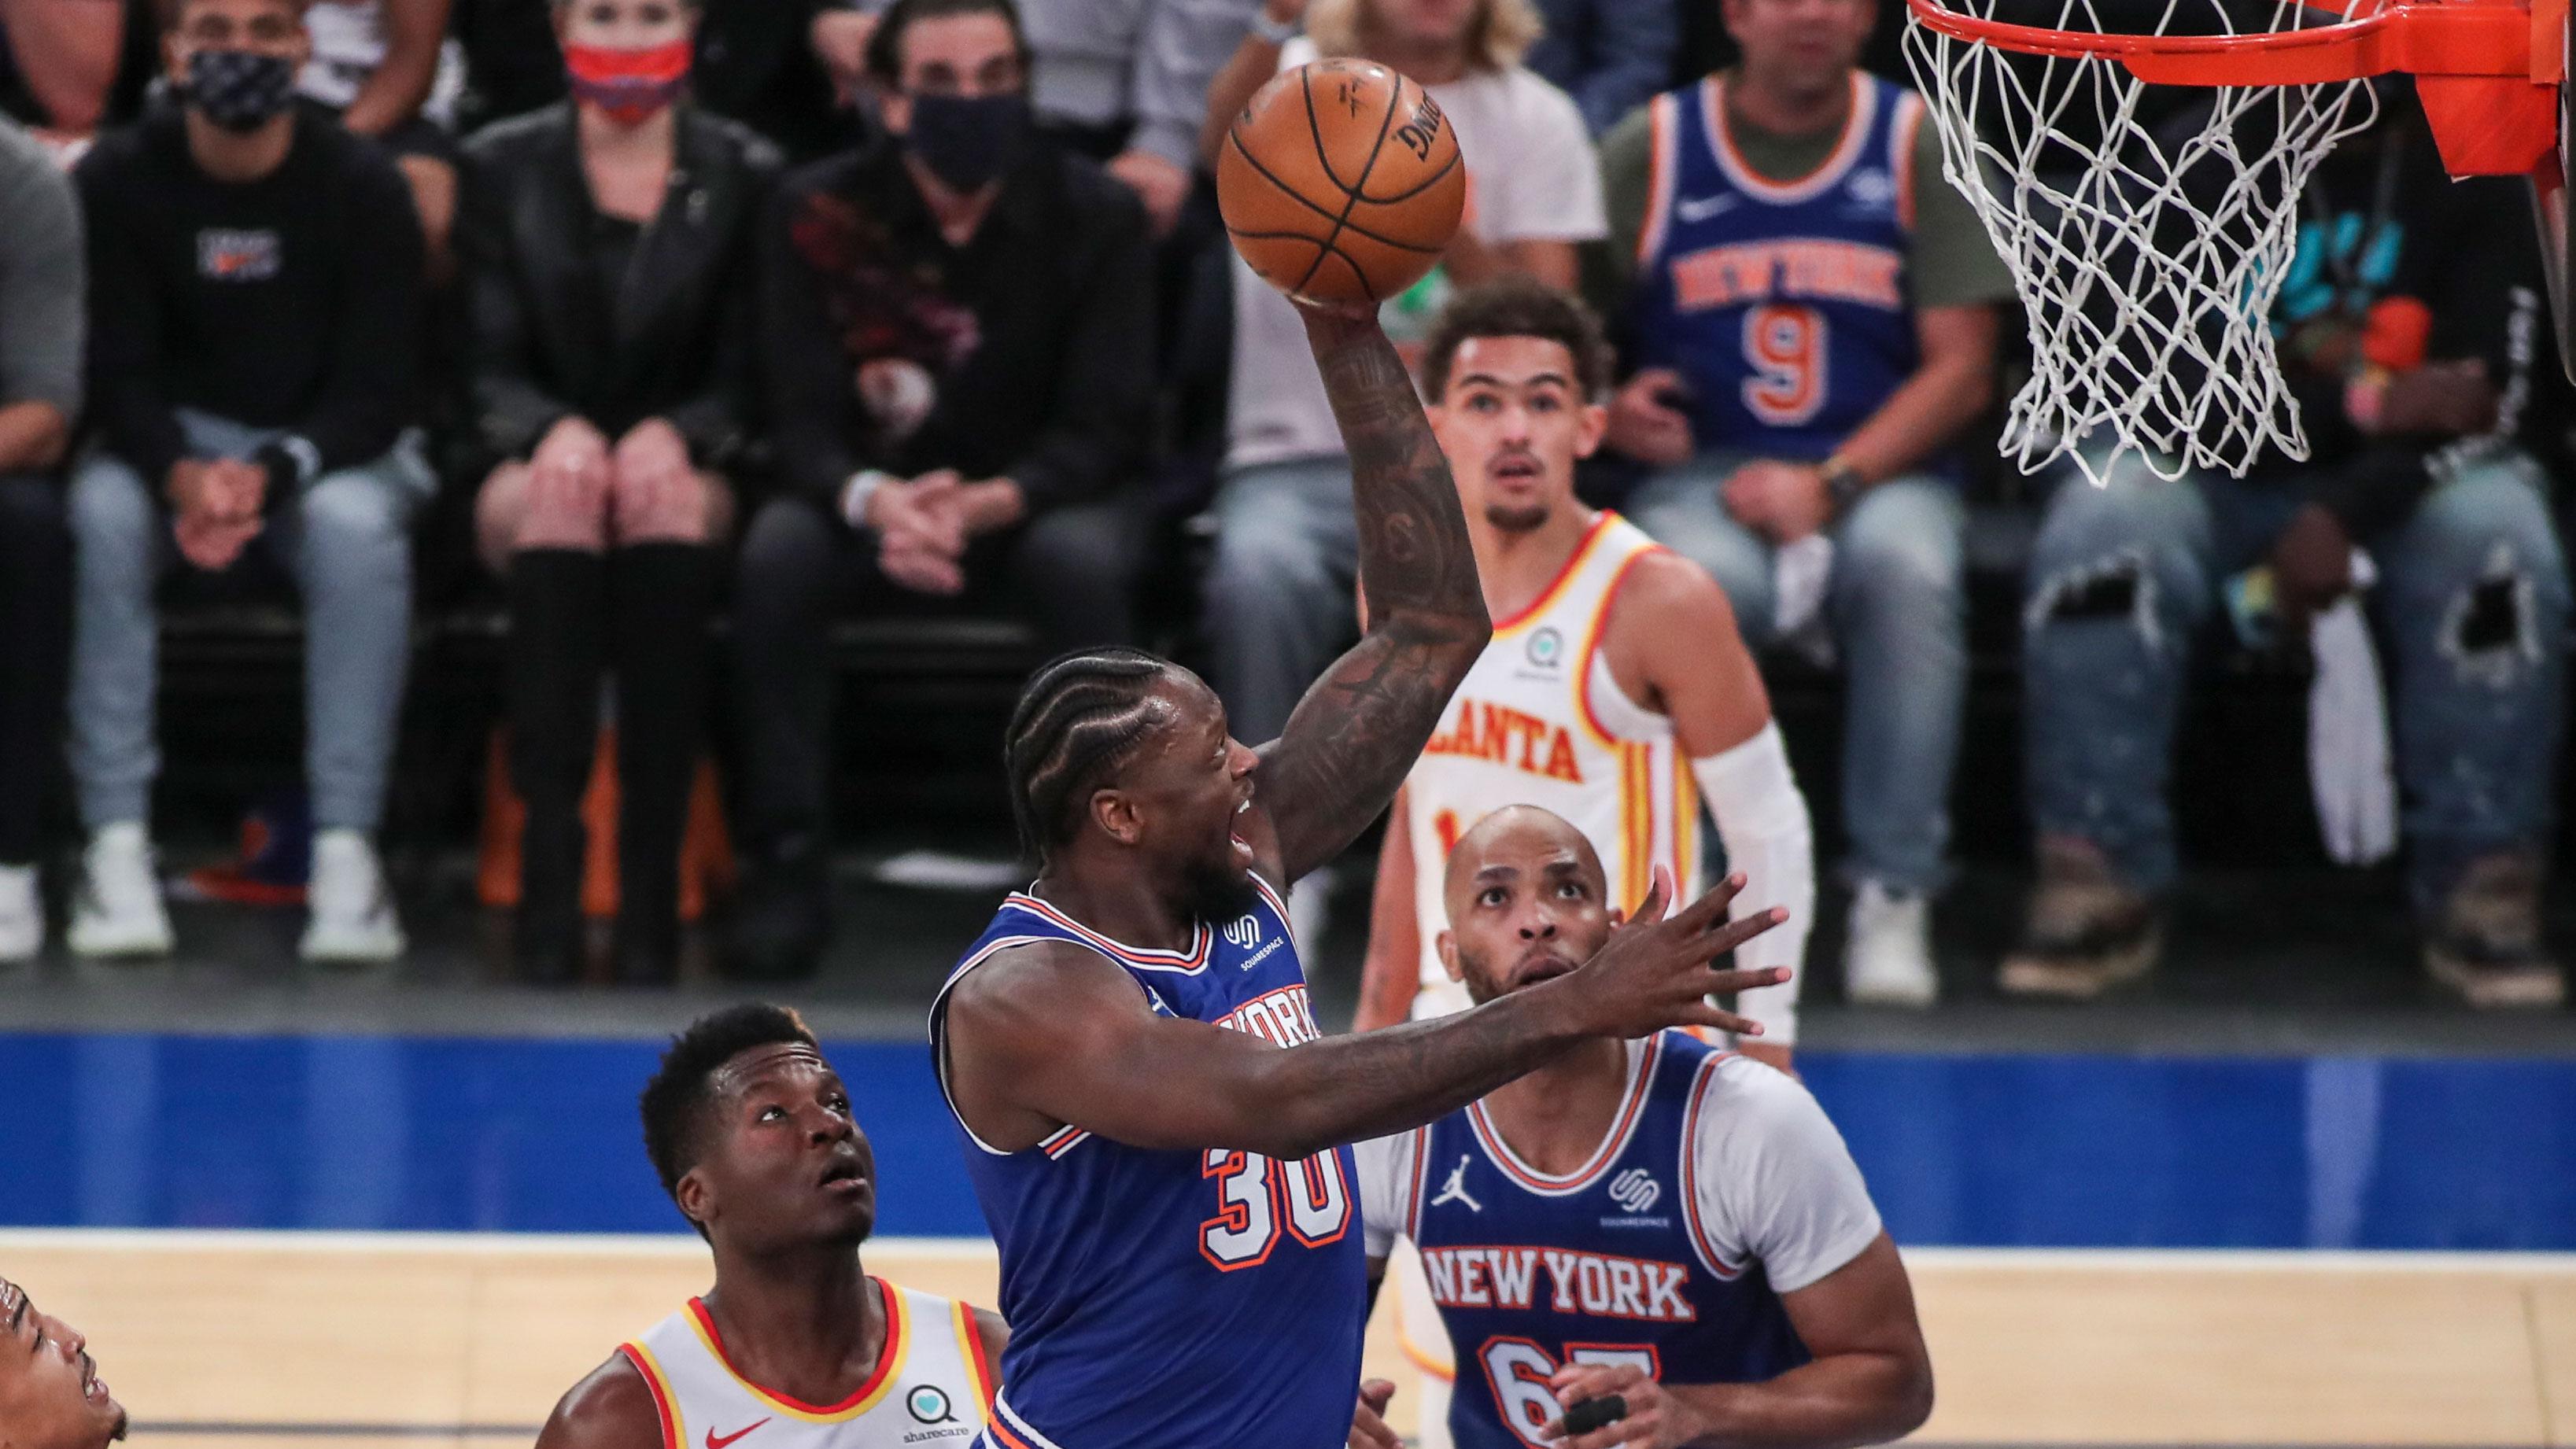 Jun 2, 2021; New York, New York, USA; New York Knicks forward Julius Randle (30) drives to the basket in the first quarter against the Atlanta Hawks during game five in the first round of the 2021 NBA Playoffs. at Madison Square Garden. / Wendell Cruz-USA TODAY Sports